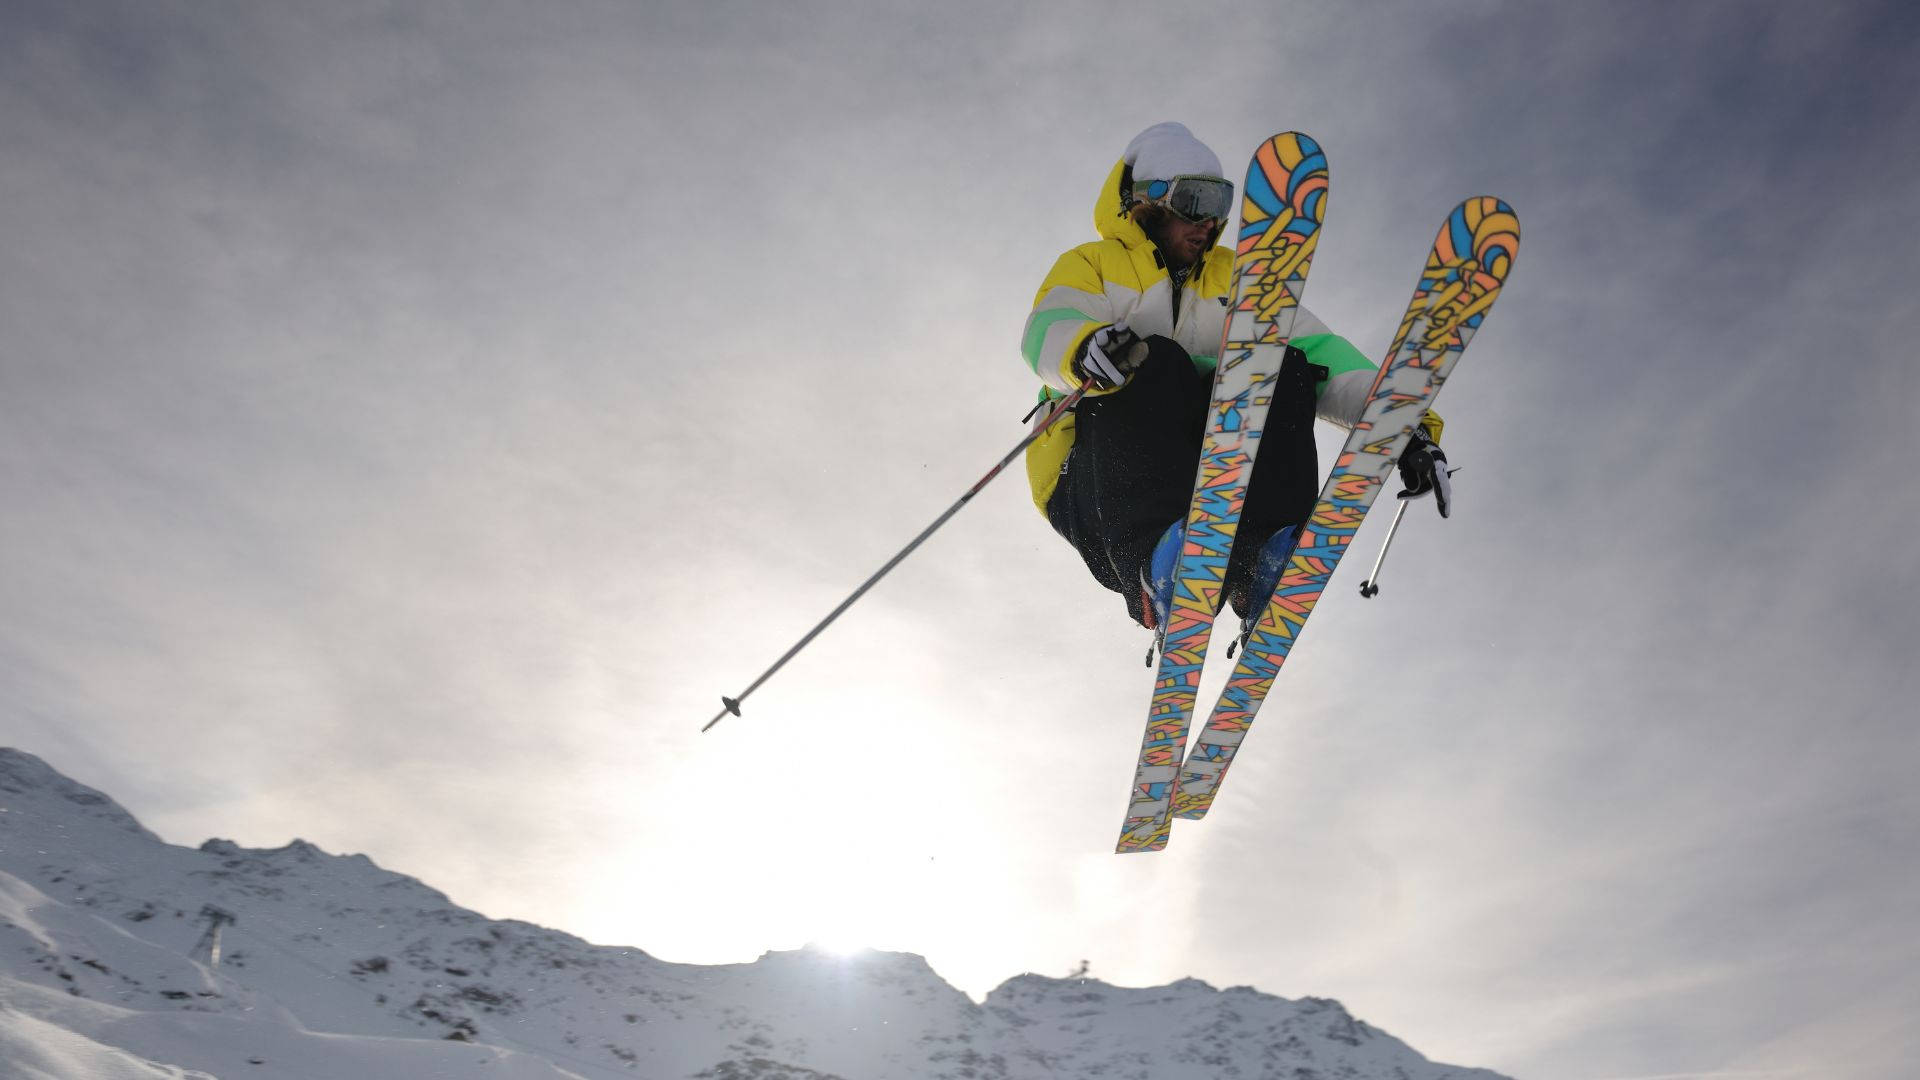 Caption: Intense Action Mid-air - Ski Jumper In Motion Background